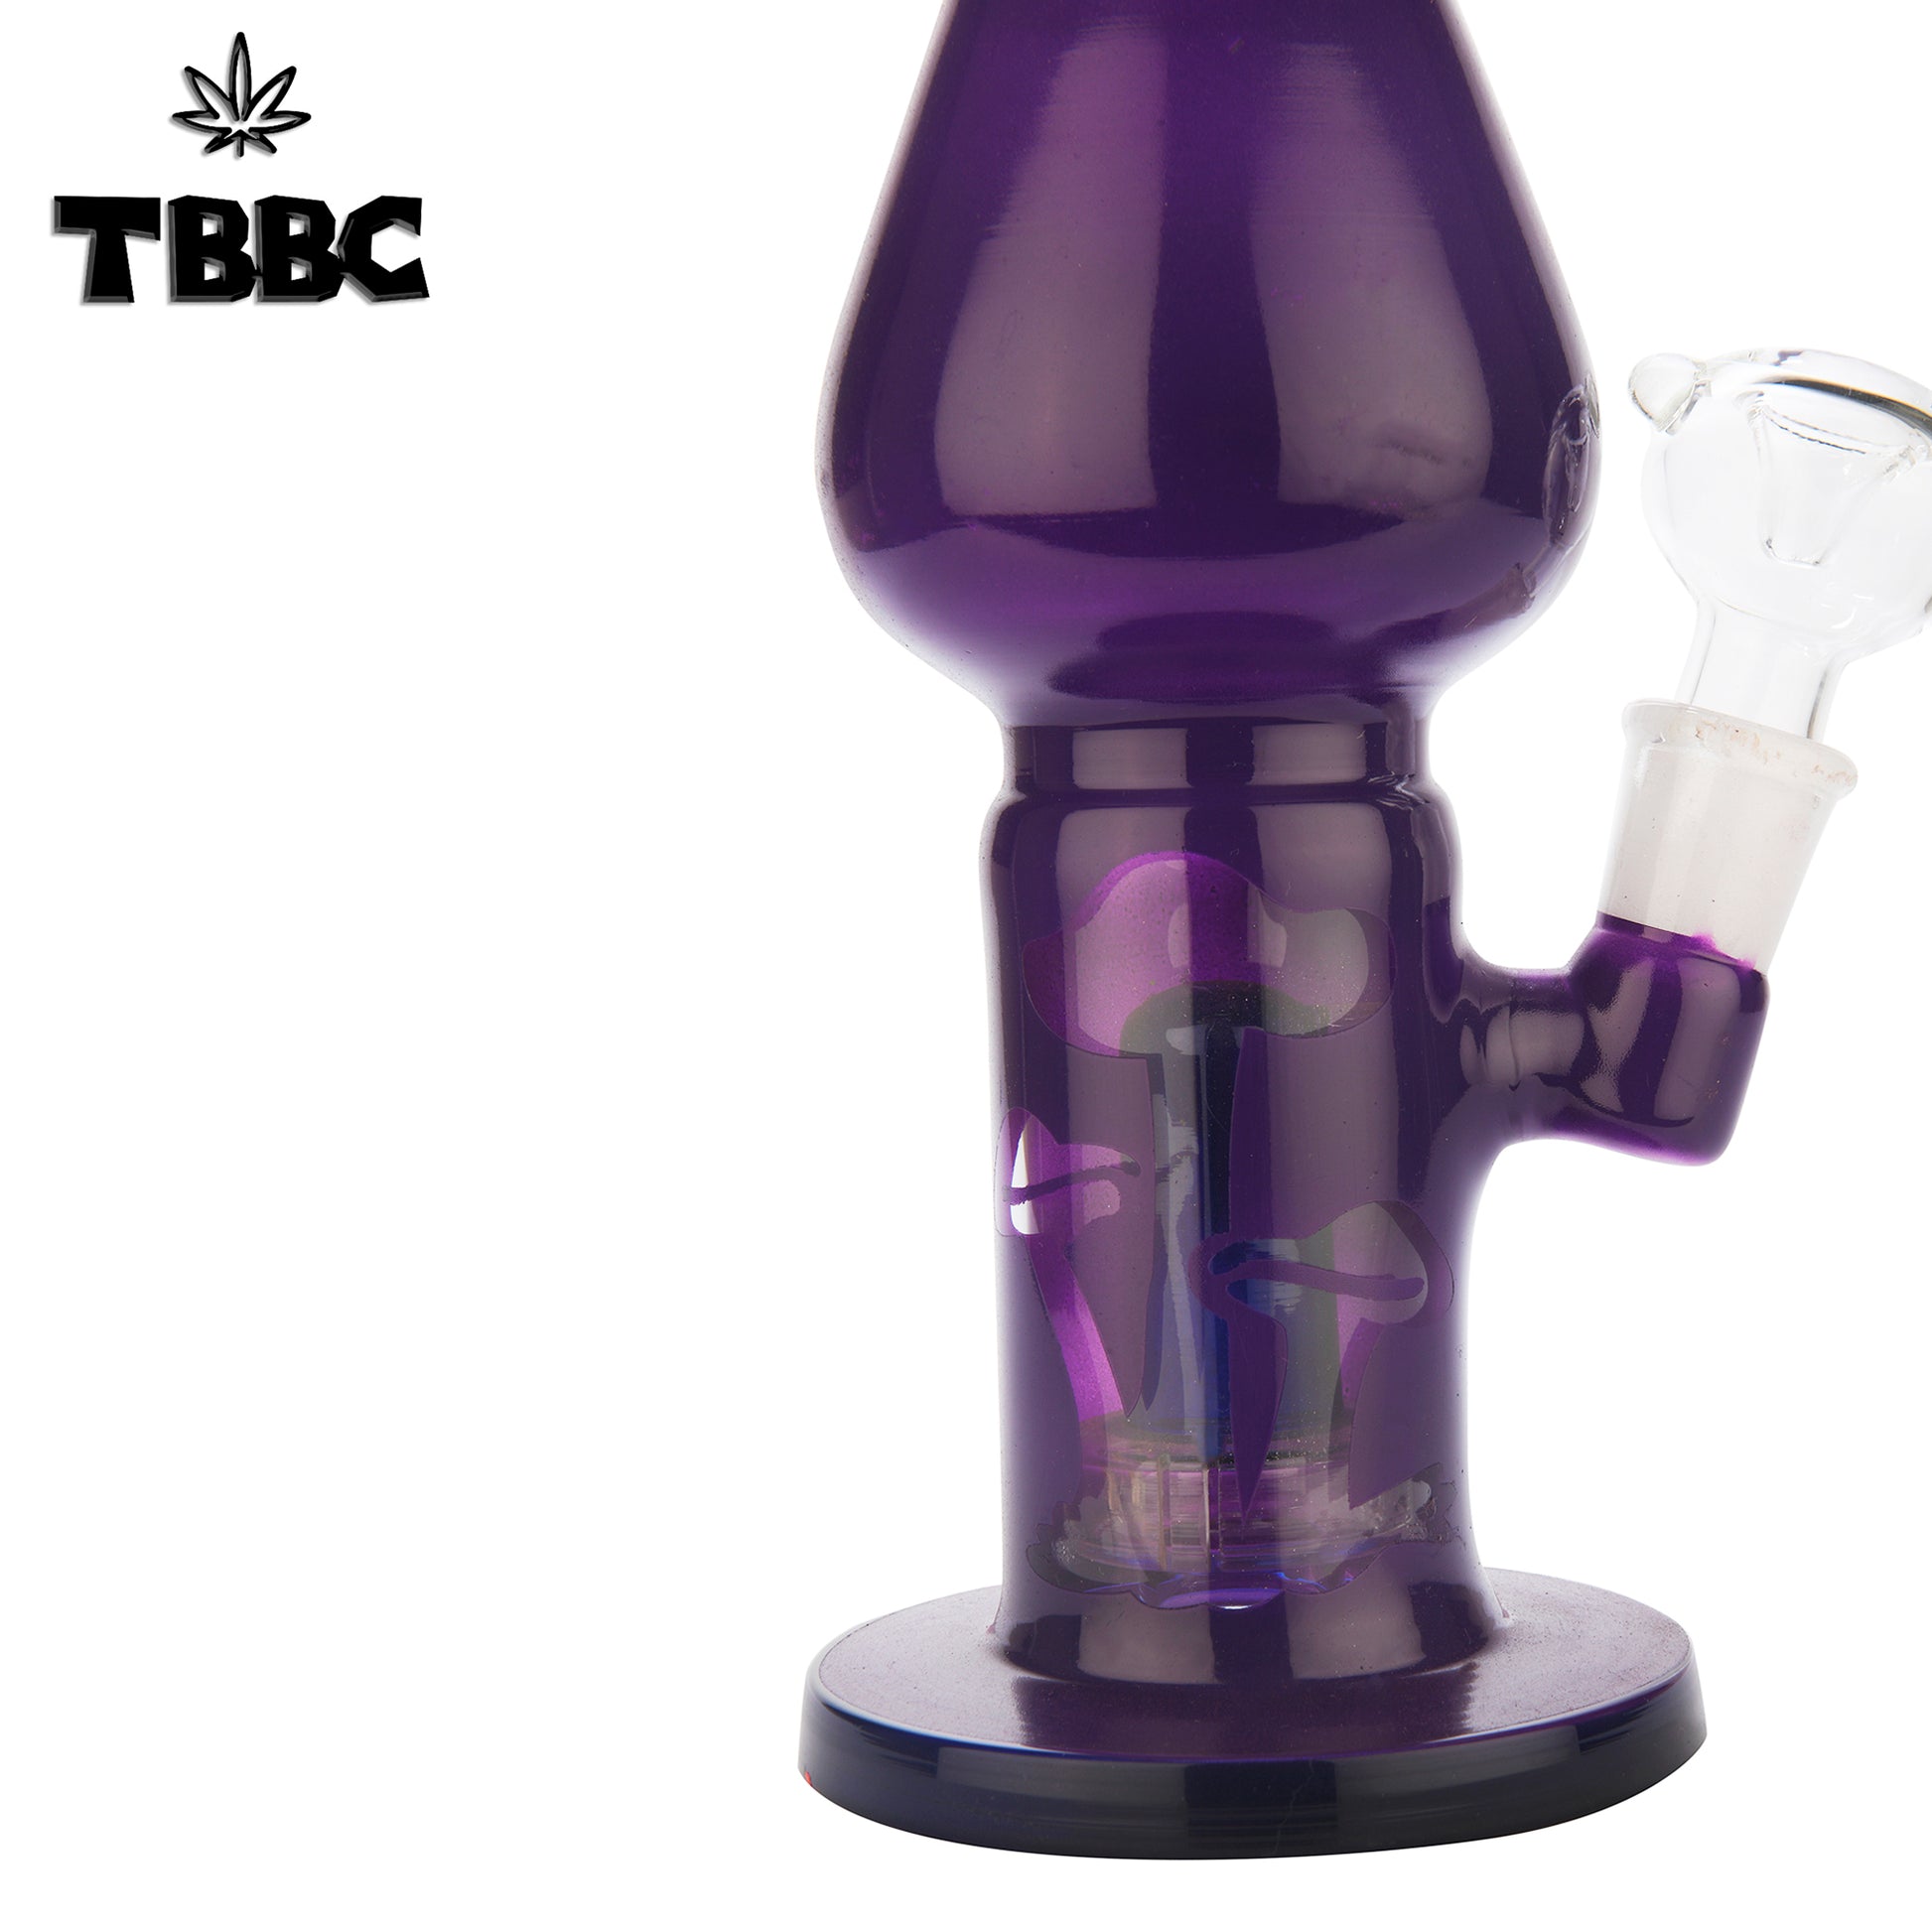 Durable glass bong Delhi NCR delivery, Smooth hitting bongs express delivery India, Ice percolator bong review Delhi NCR, Quality glass percolator bong fast delivery, Affordable percolator bongs India delivery, Thick glass percolator bong Delhi NCR, Cool percolator bongs express delivery, Best glass bongs India delivery, Ice catcher water pipe instant delivery, Ice catcher glass bong fast delivery India, Percolator water pipe Delhi NCR delivery, Buy percolator bong online express